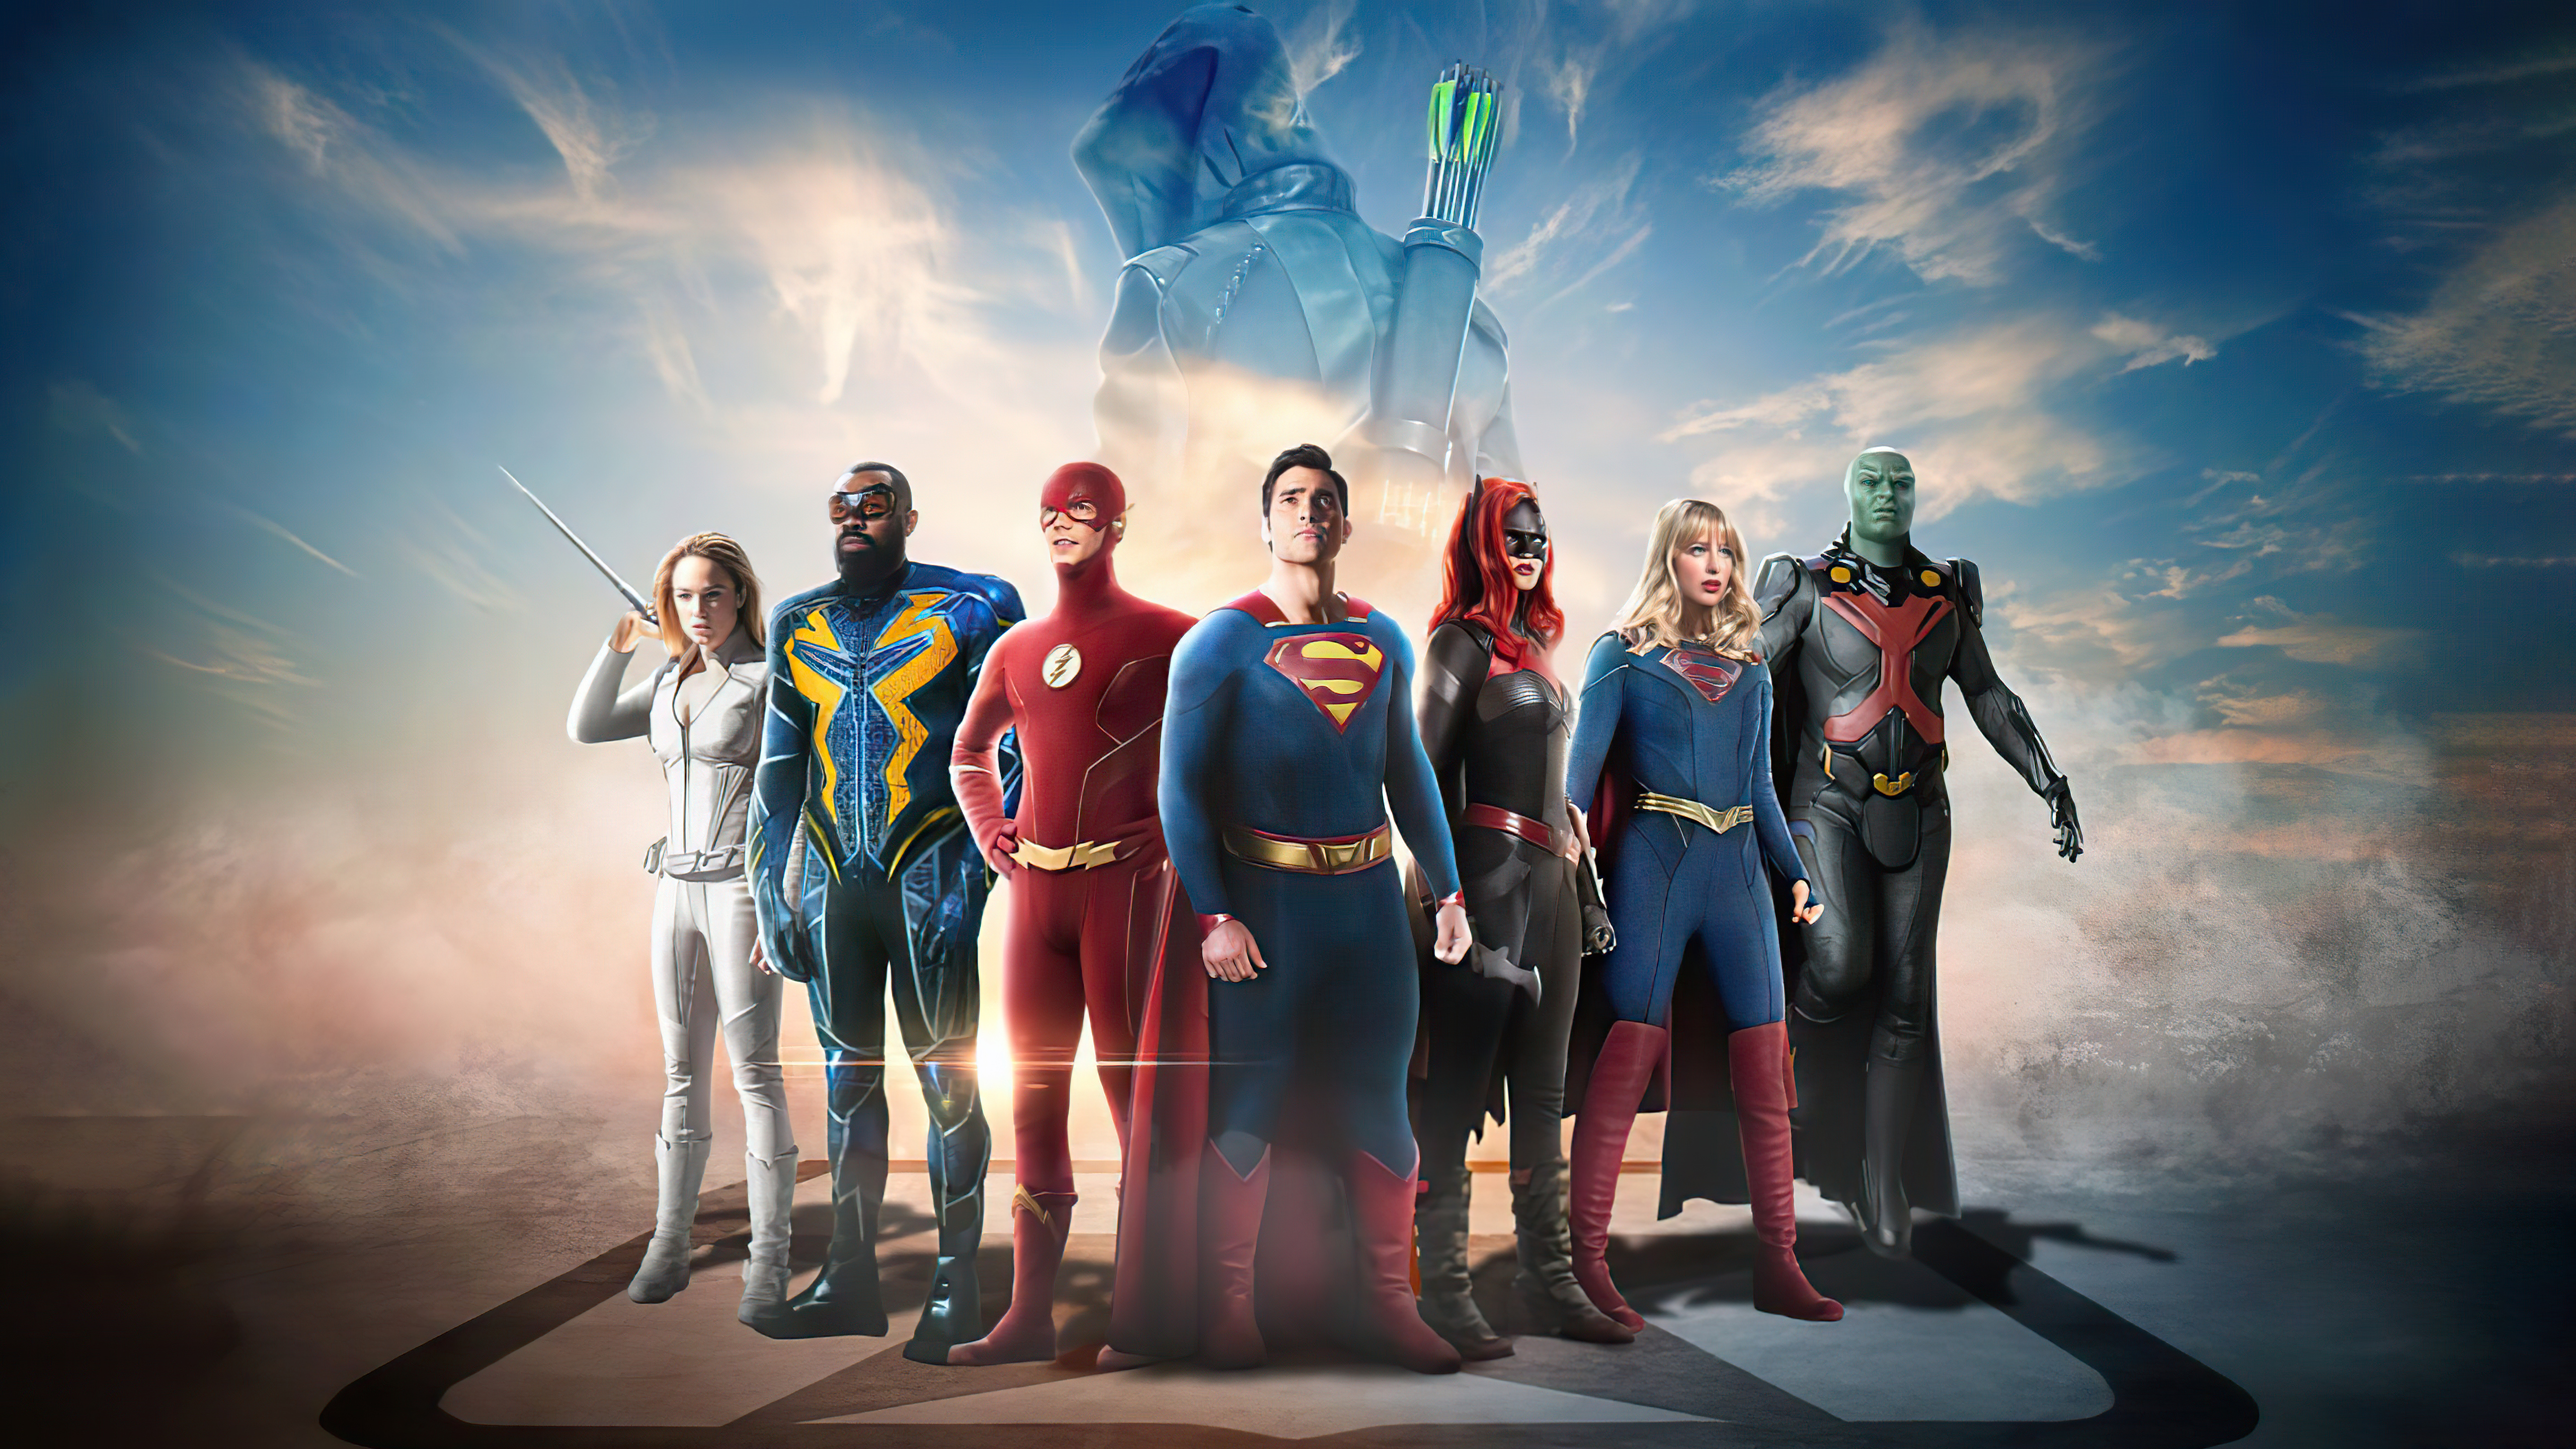 Free photo The Justice League Movie